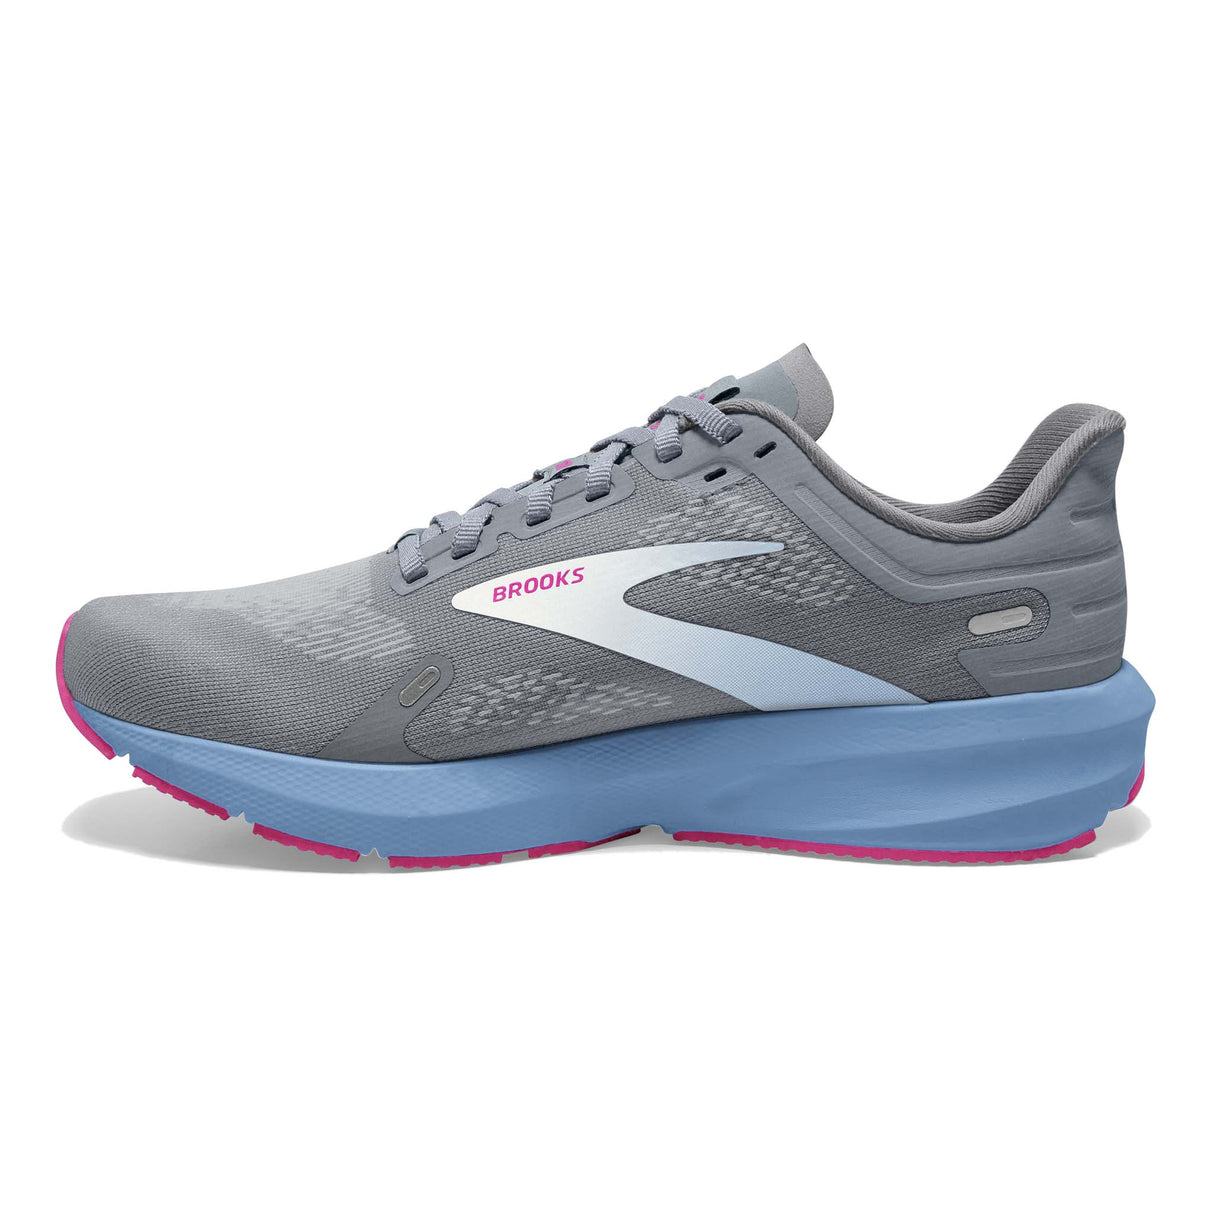 Brooks Launch 9 running femme lateral- grey blue pink